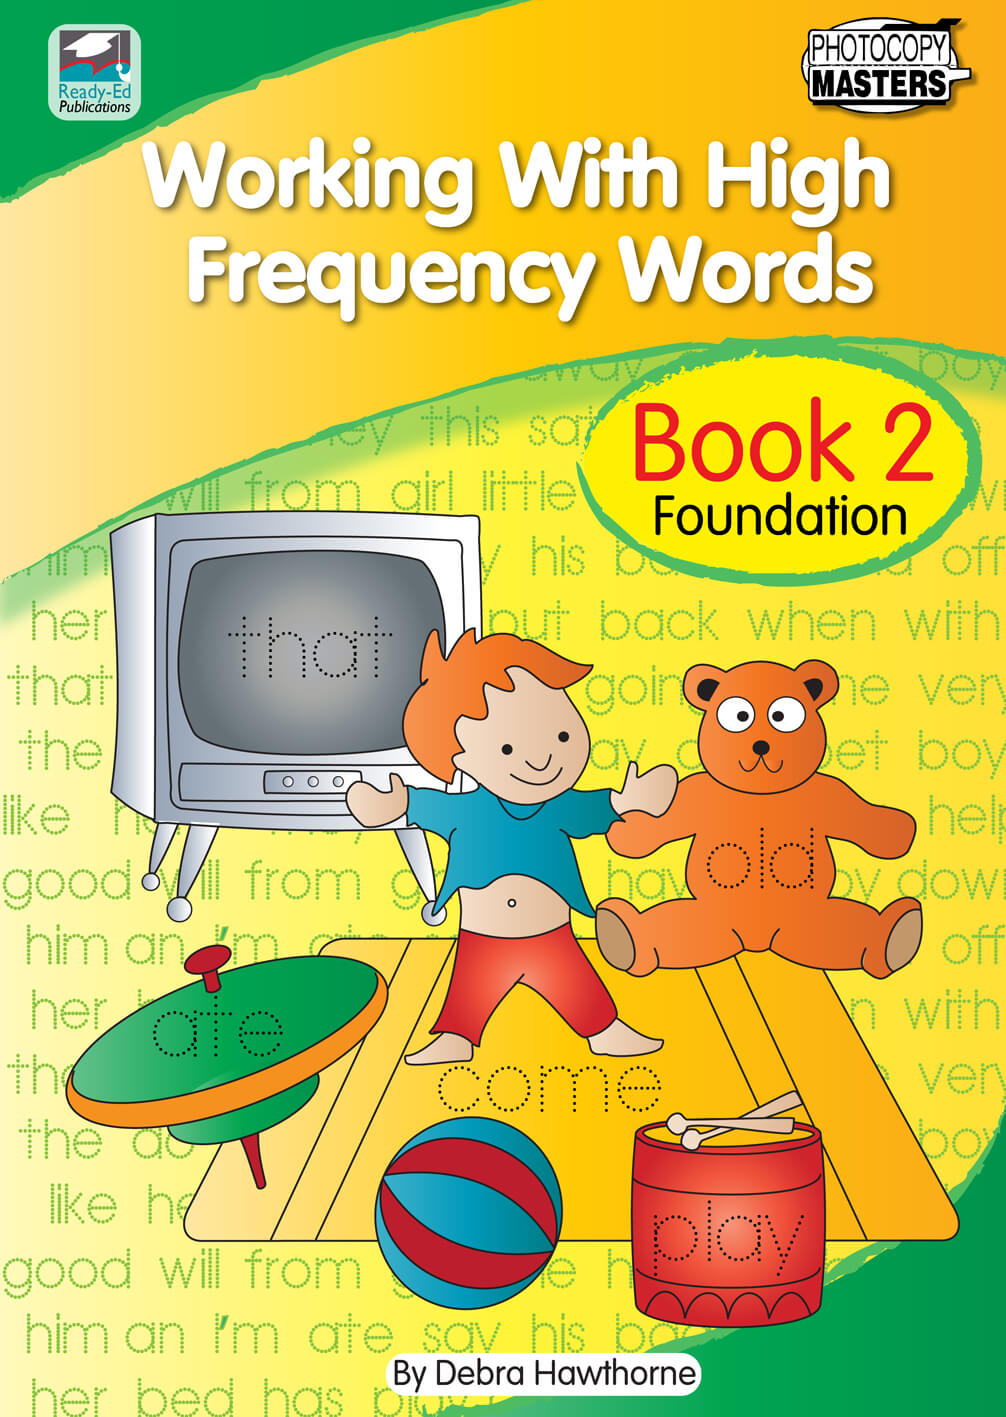 working-with-high-frequency-words-book-2-teaching-resources-new-zealand